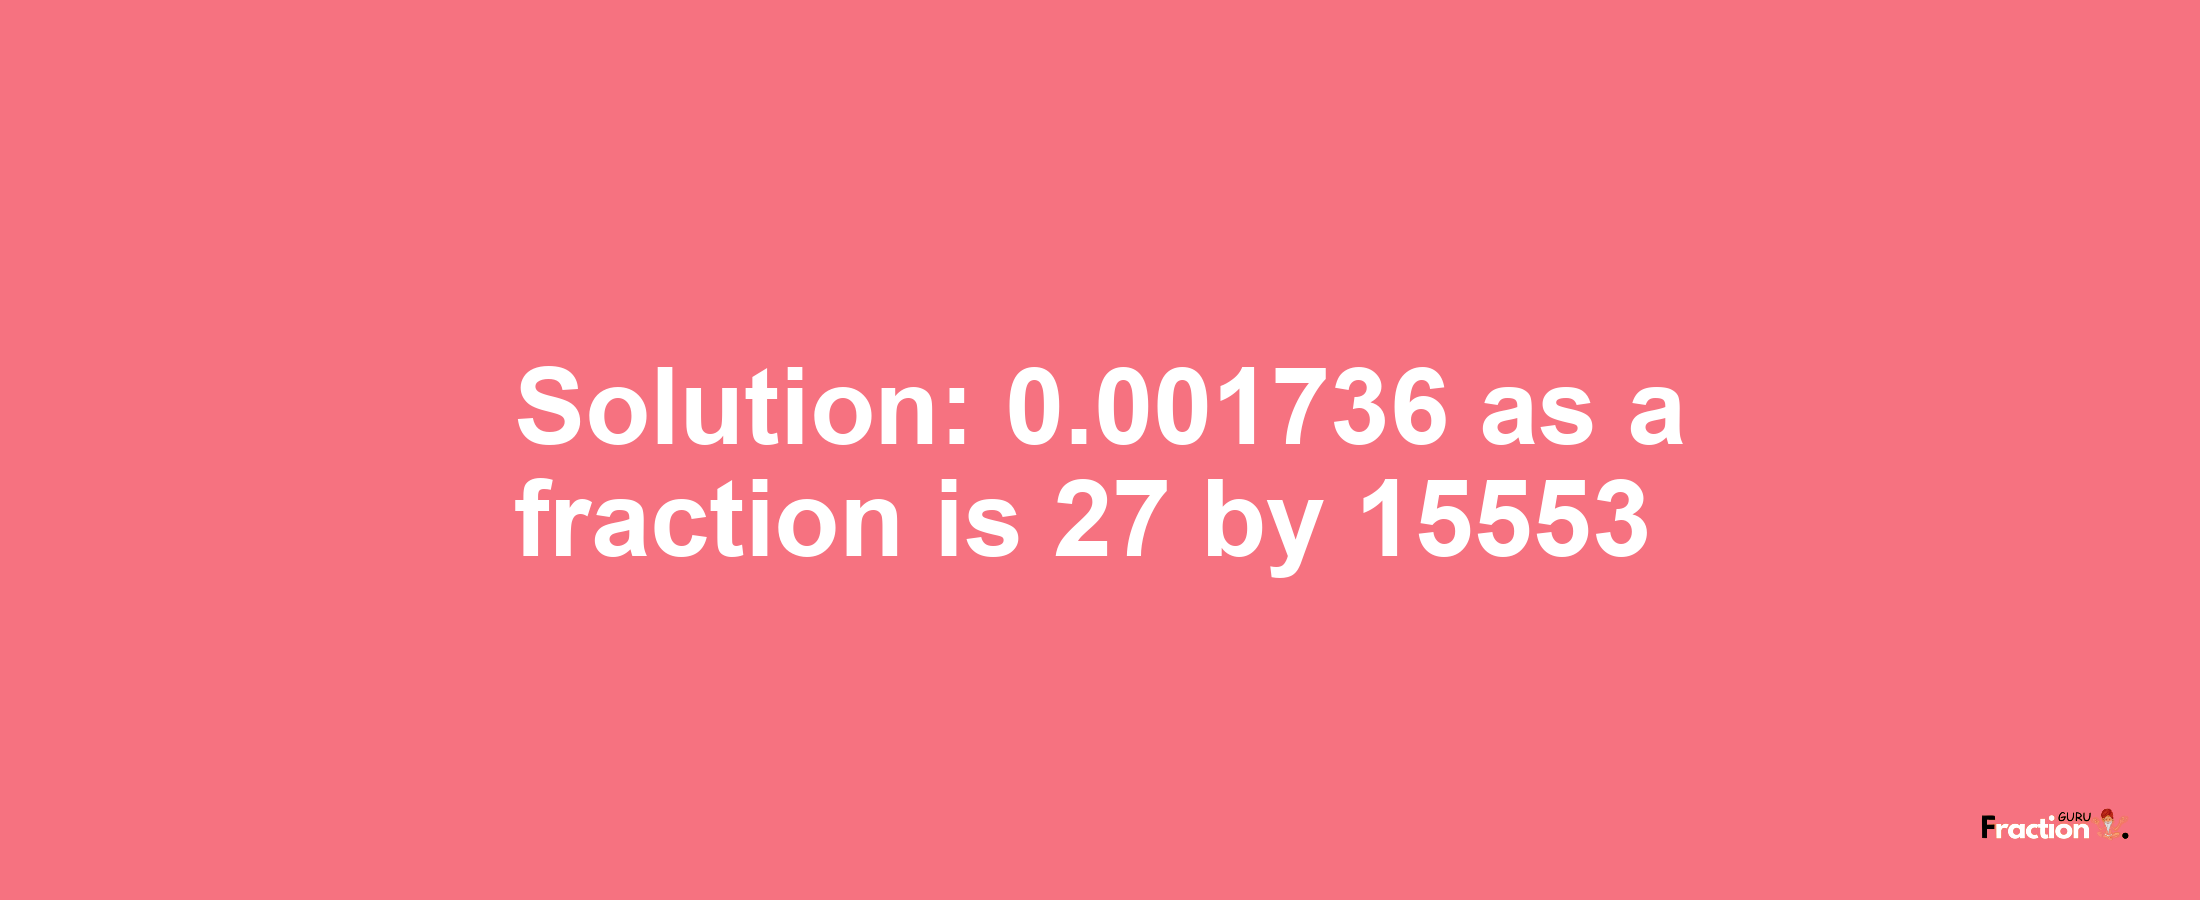 Solution:0.001736 as a fraction is 27/15553